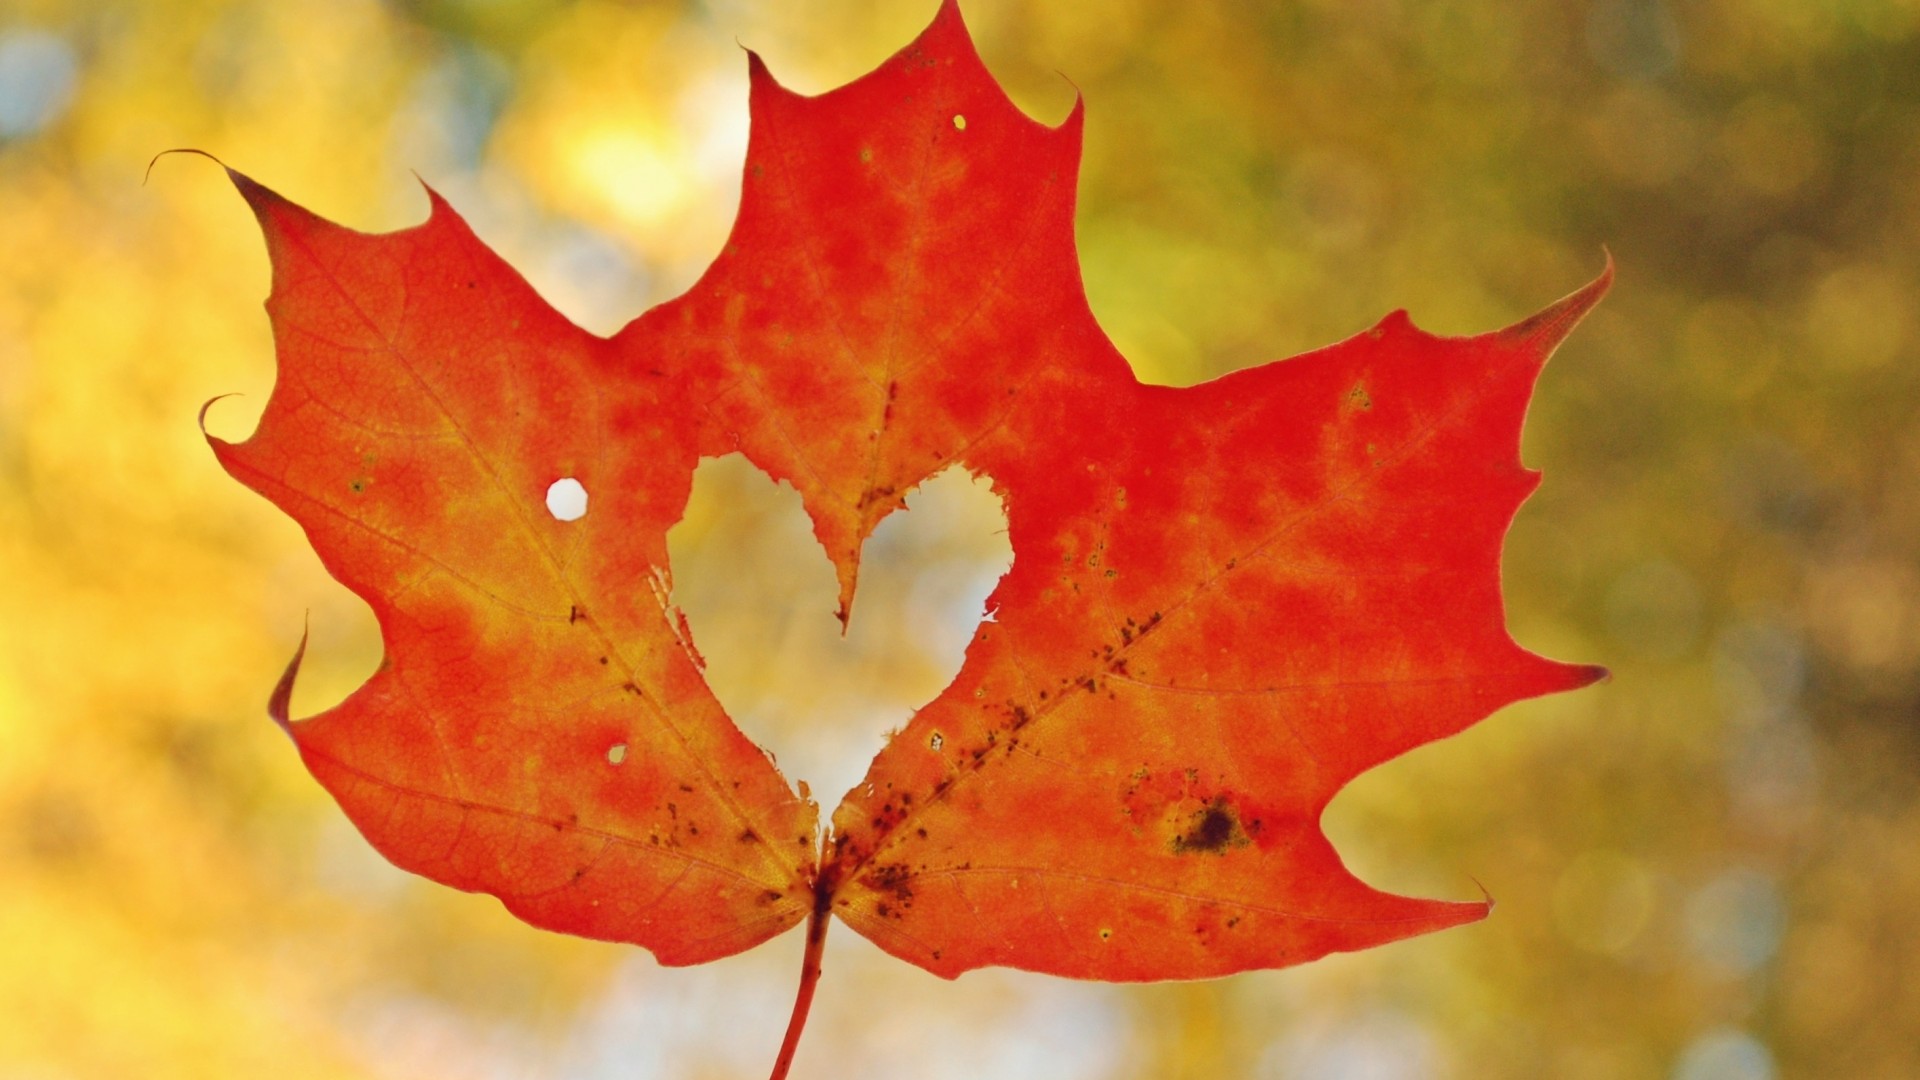 Maple Leaf Photos - Wallpaper, High Definition, High Quality, Widescreen